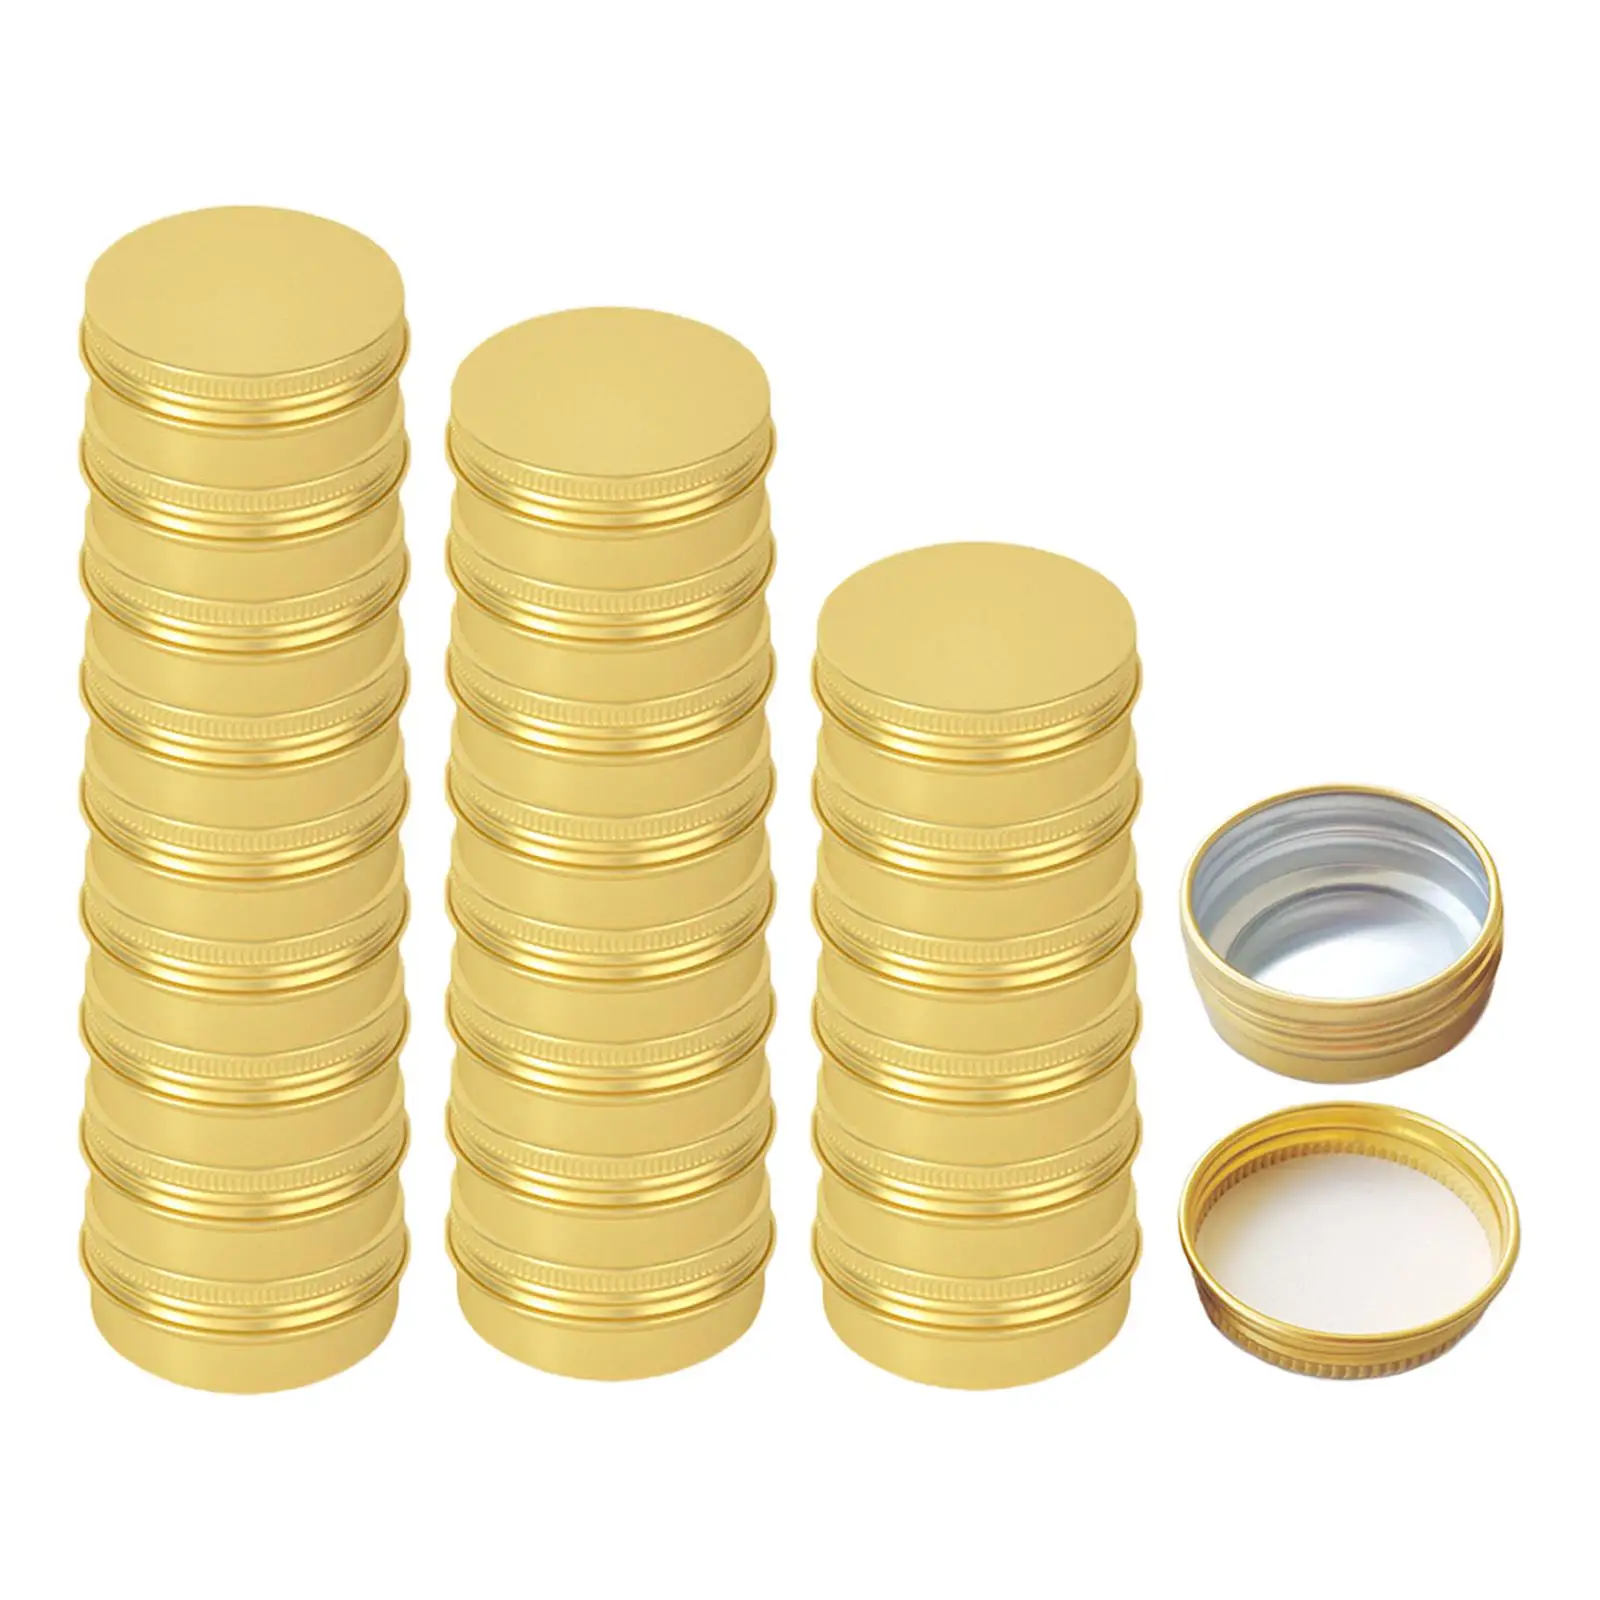 24 Pieces 15 Ml Mini Tin Cans with Screw  Round Aluminum Metal Cans